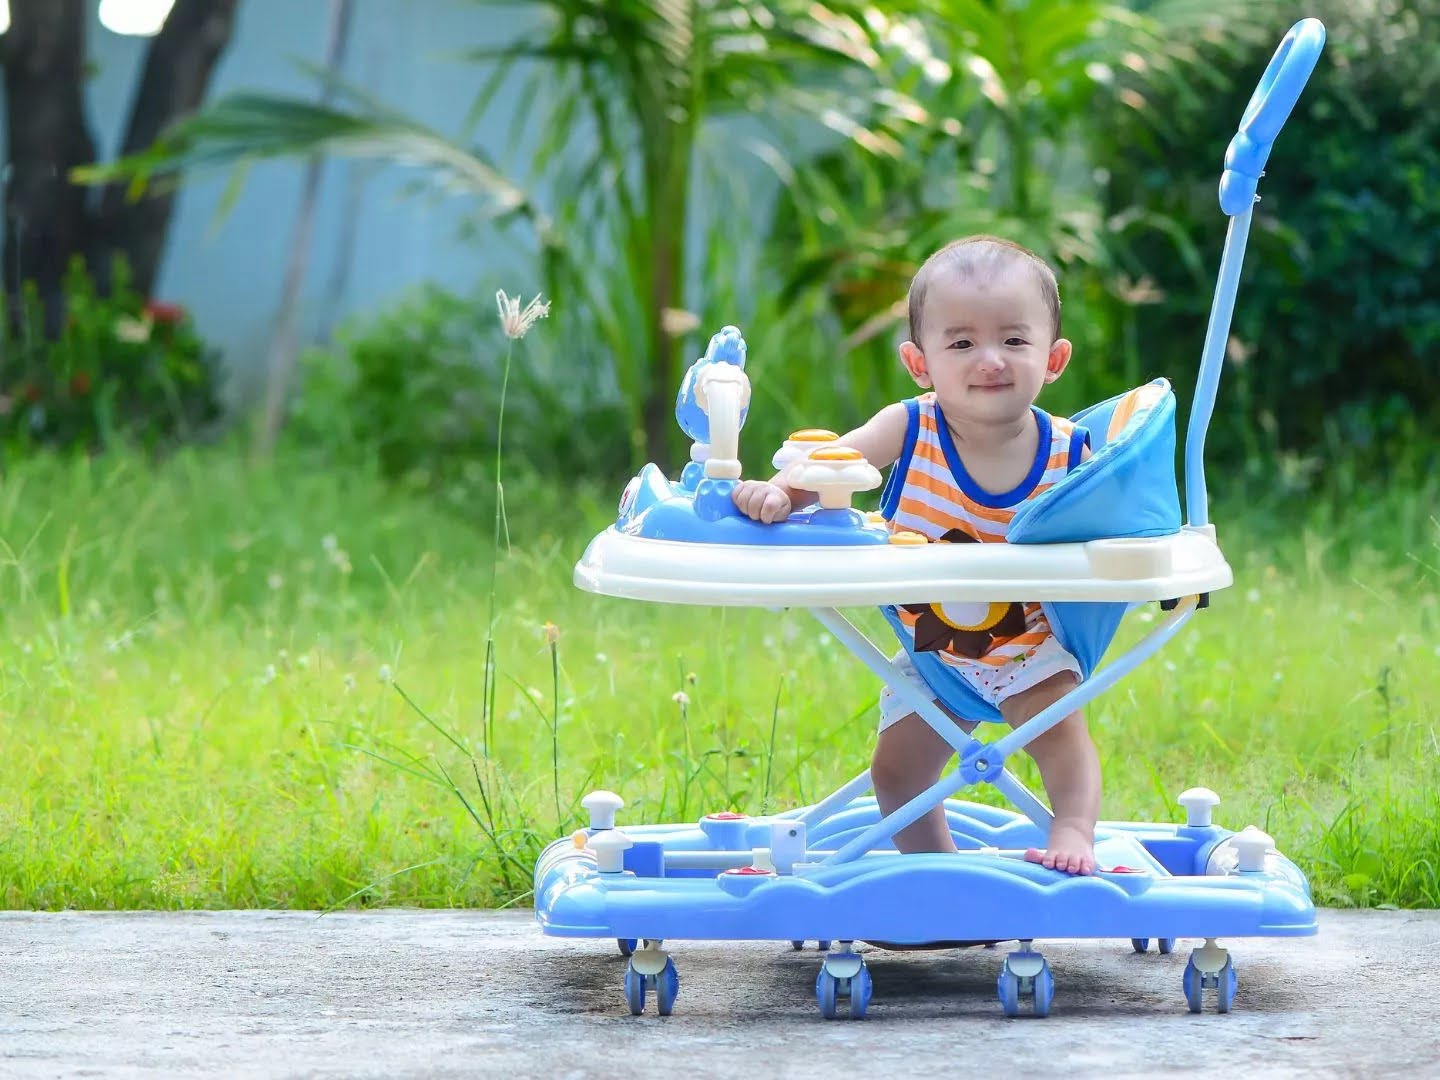 Baby Walker Review: Choosing the Best Option for Your Little One